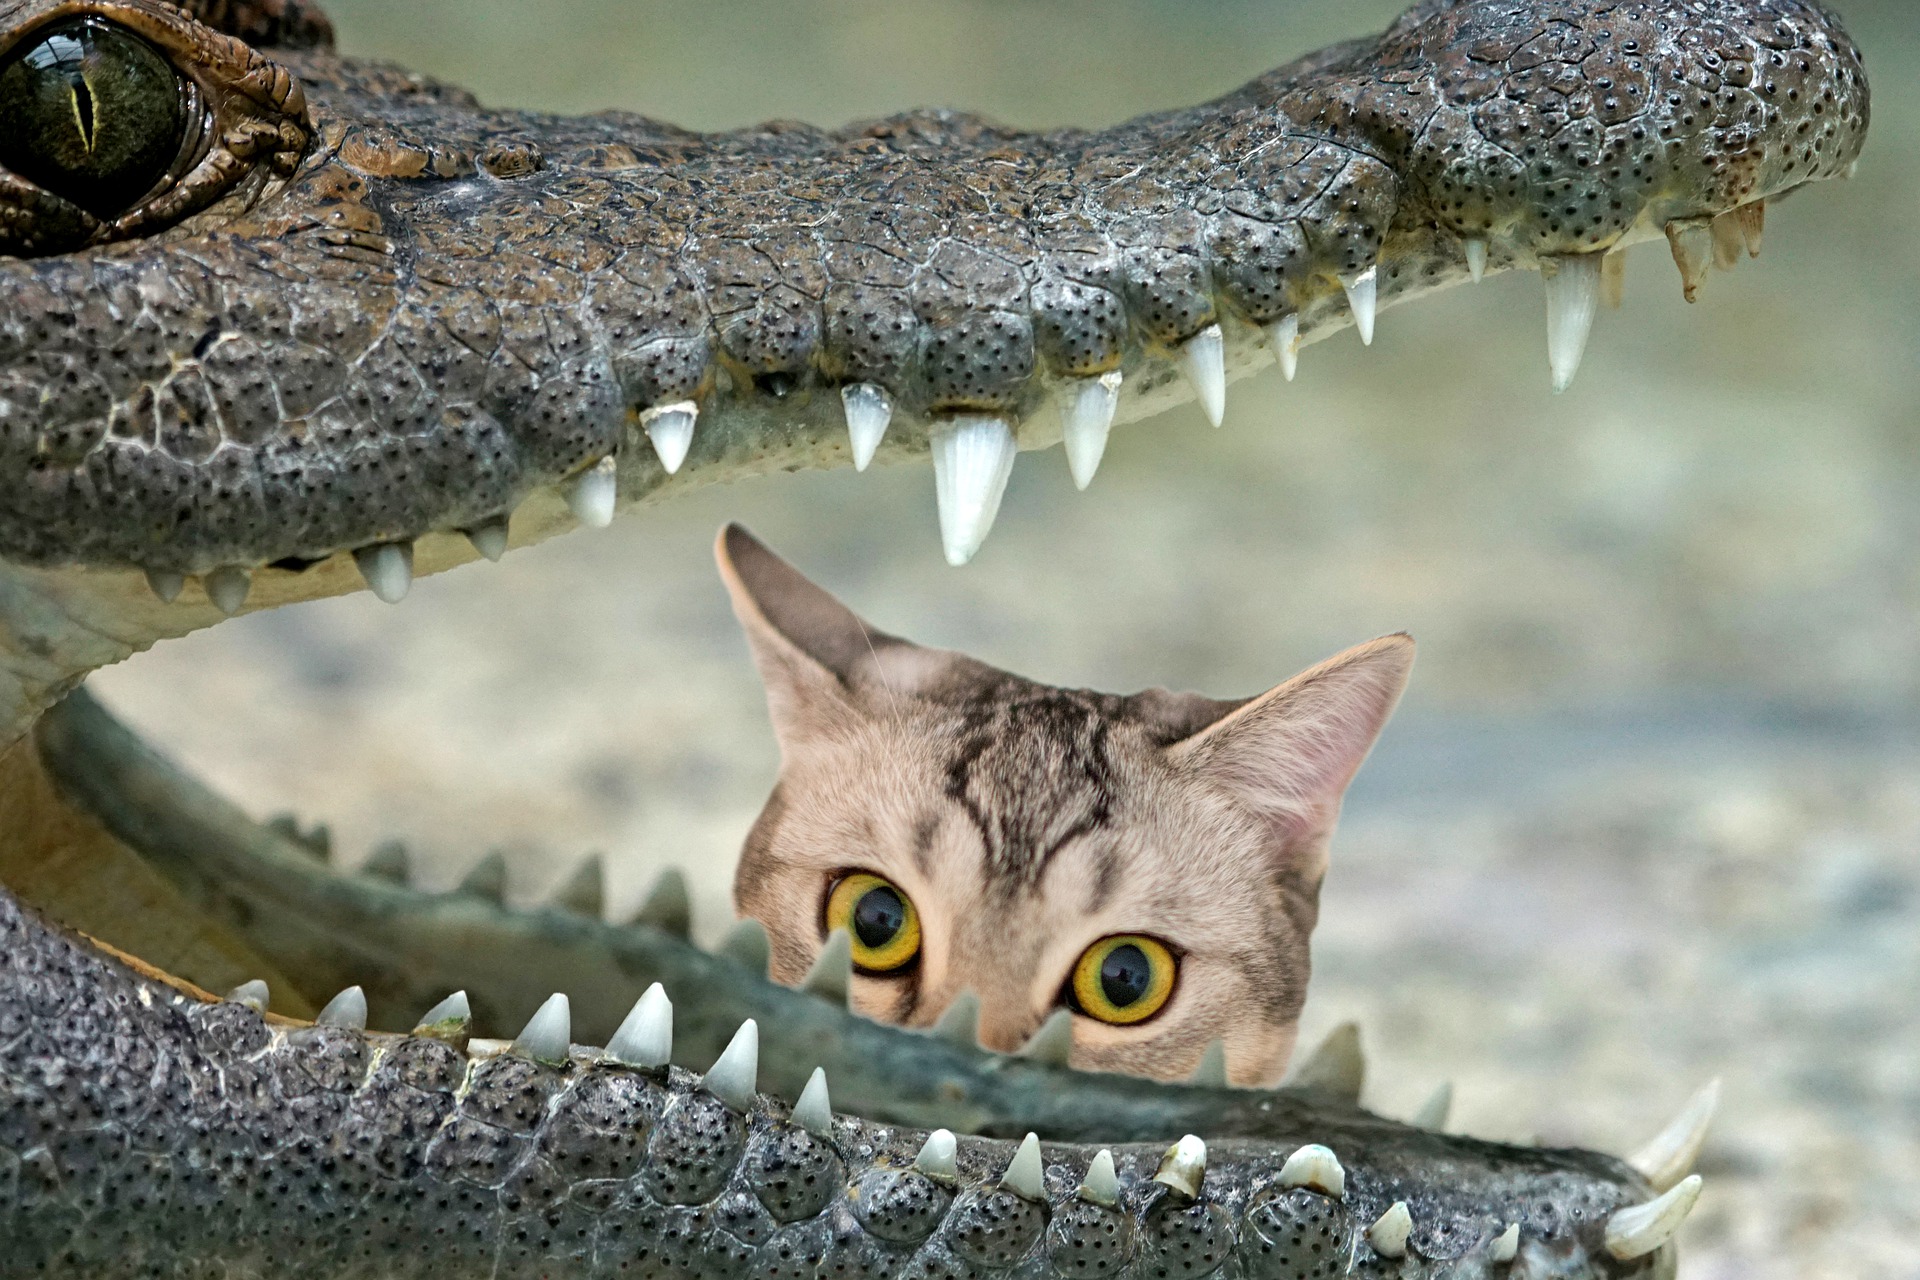 Alligator with open mouth and cat